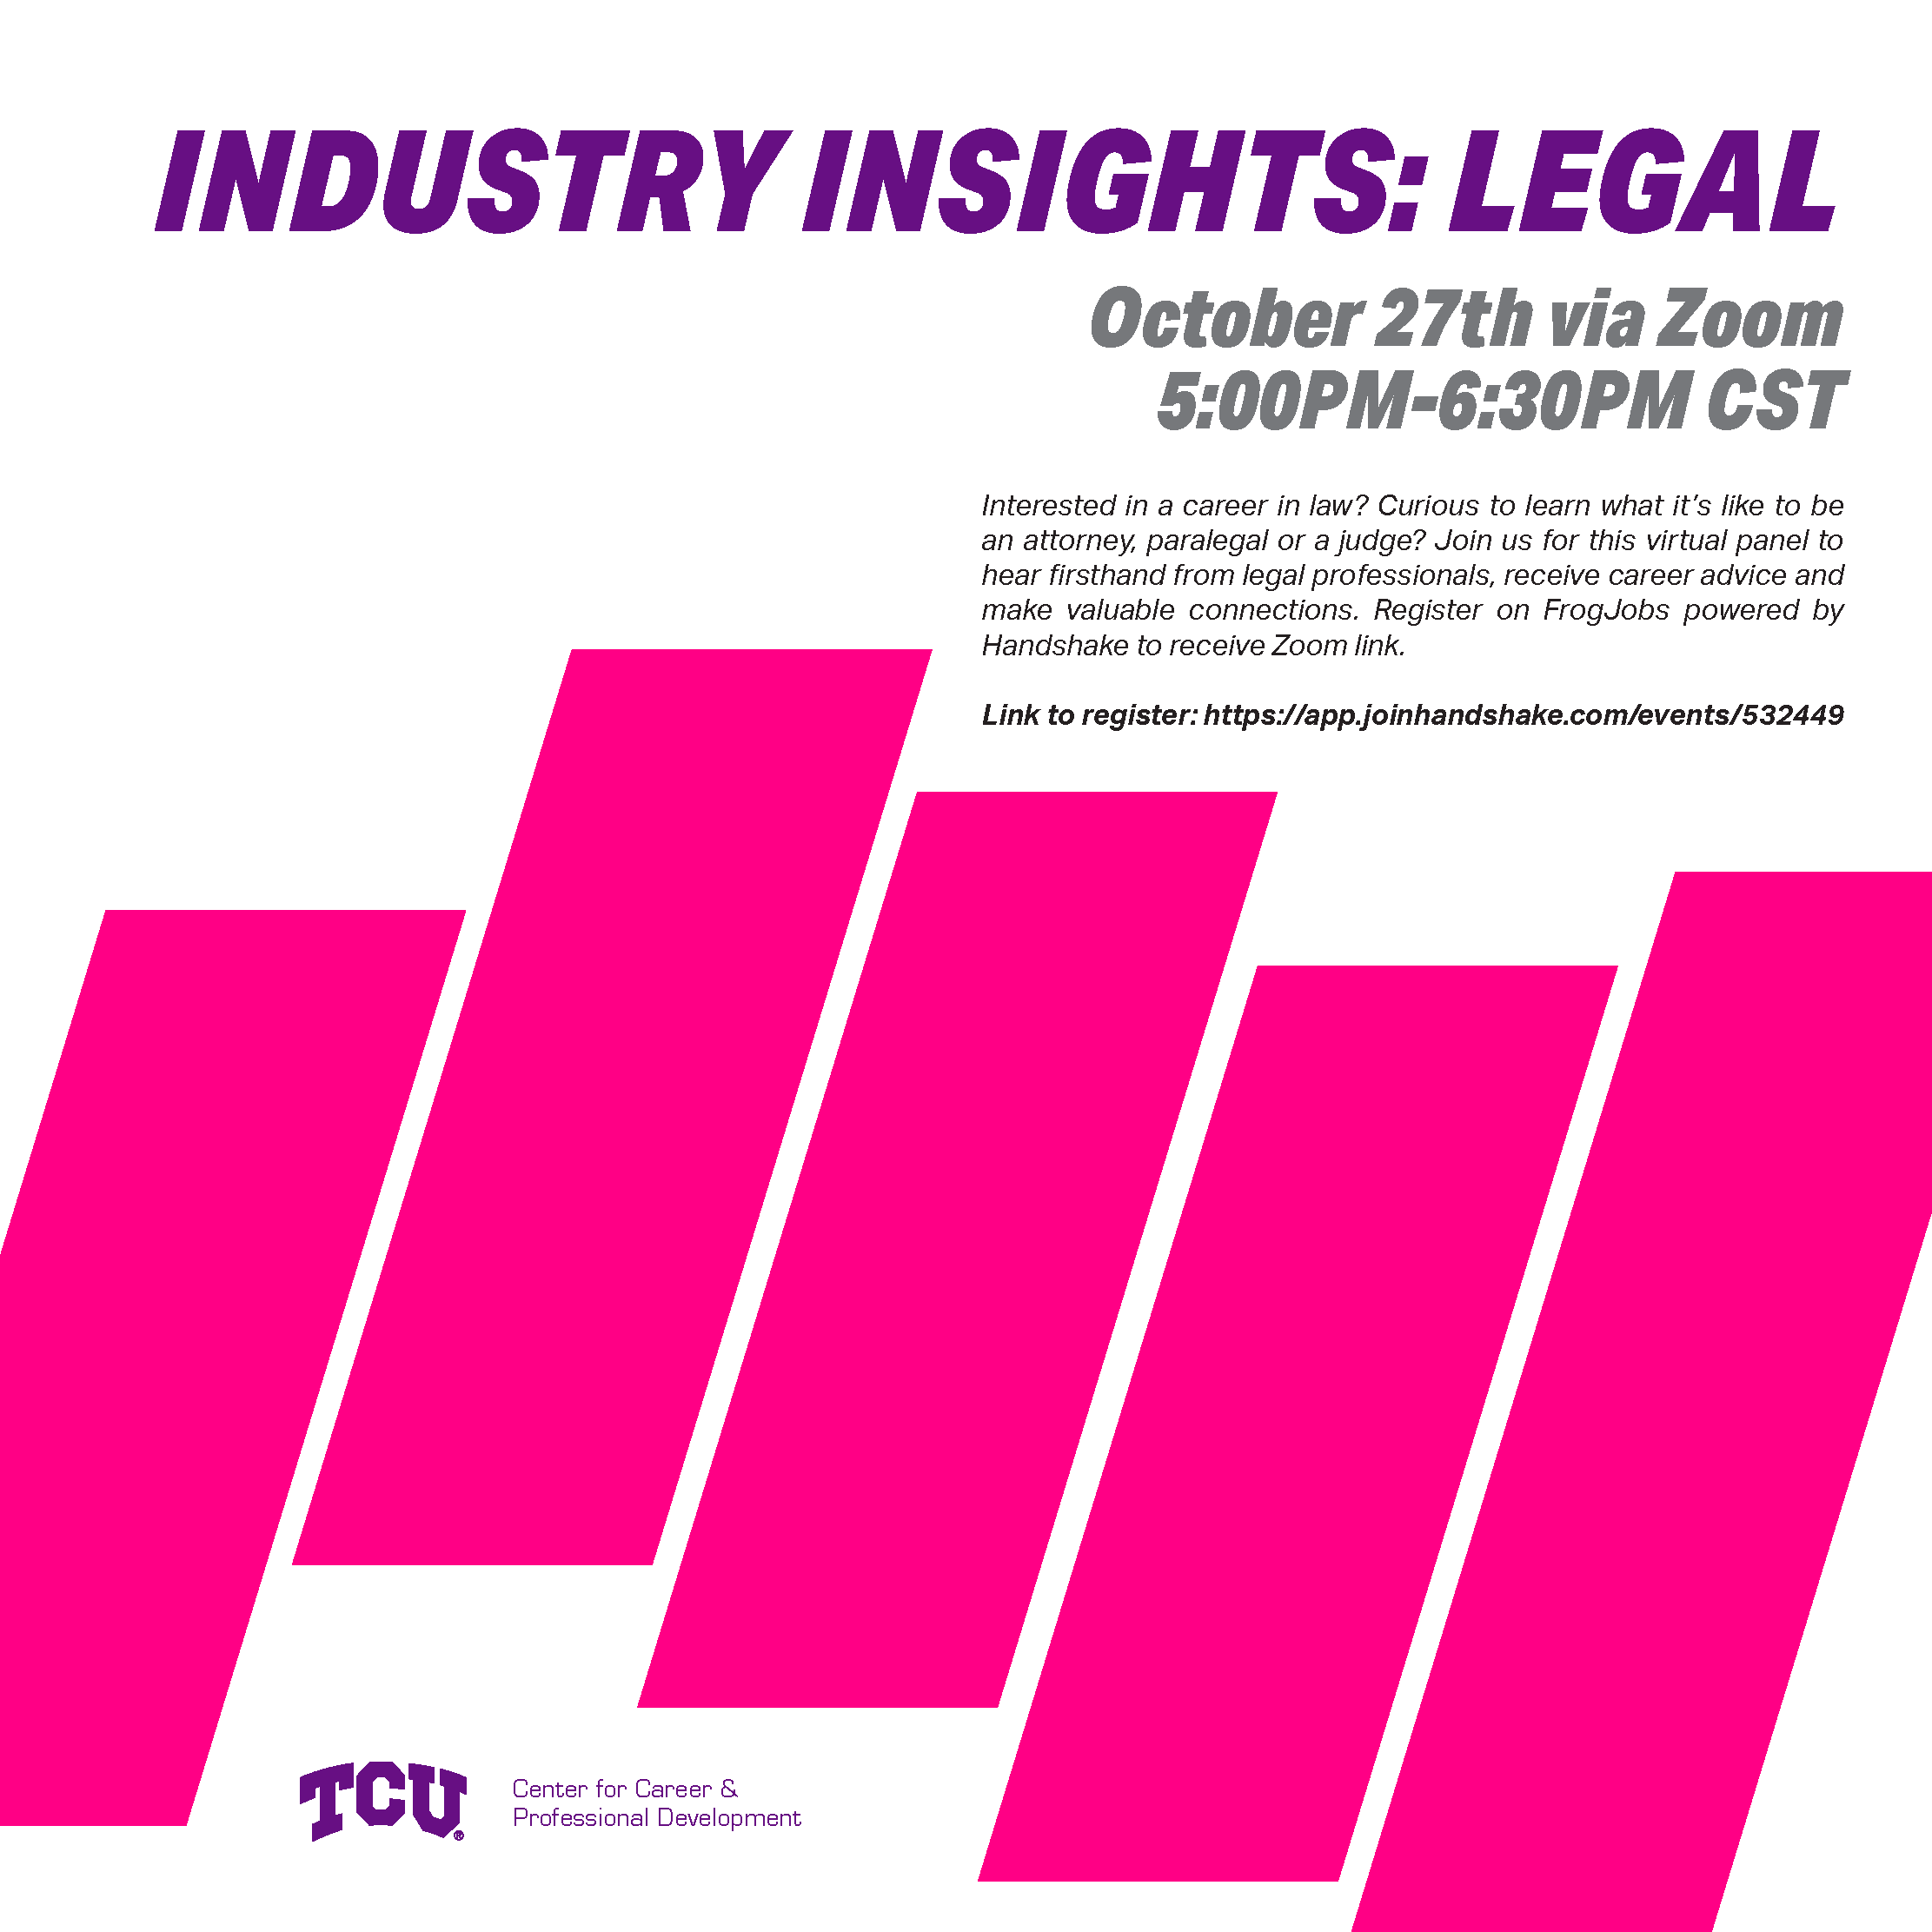 Industry Insights Legal